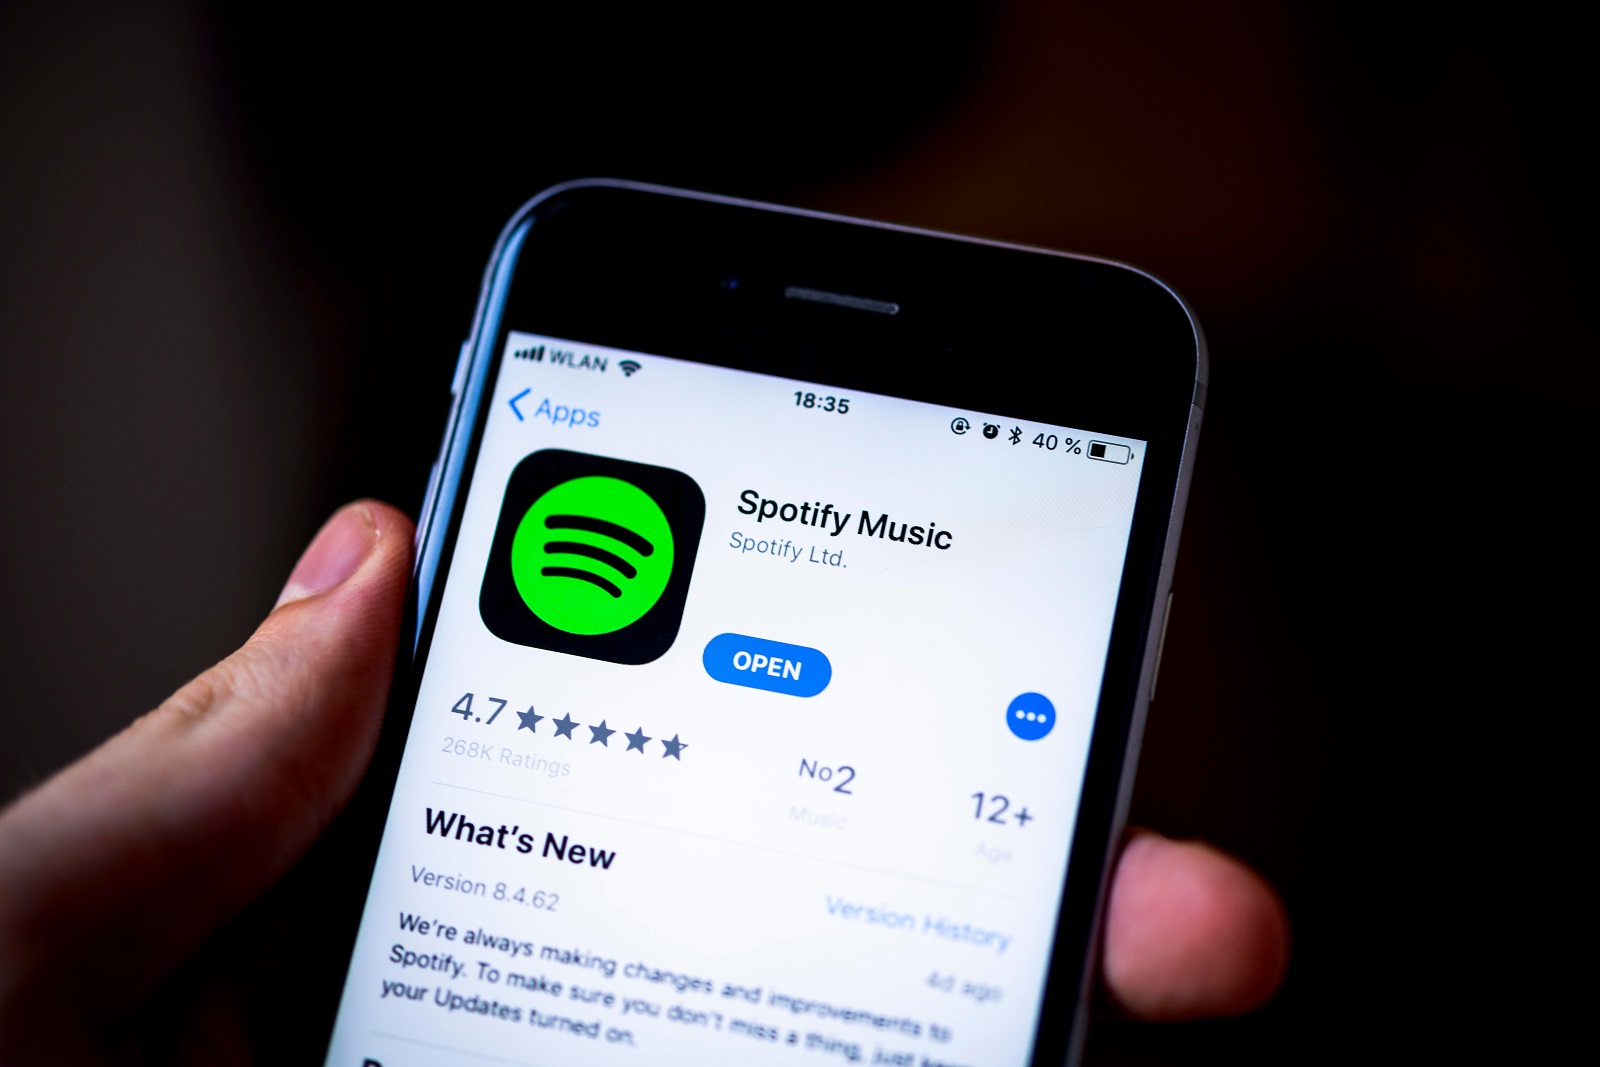 does spotify have a customer service phone number